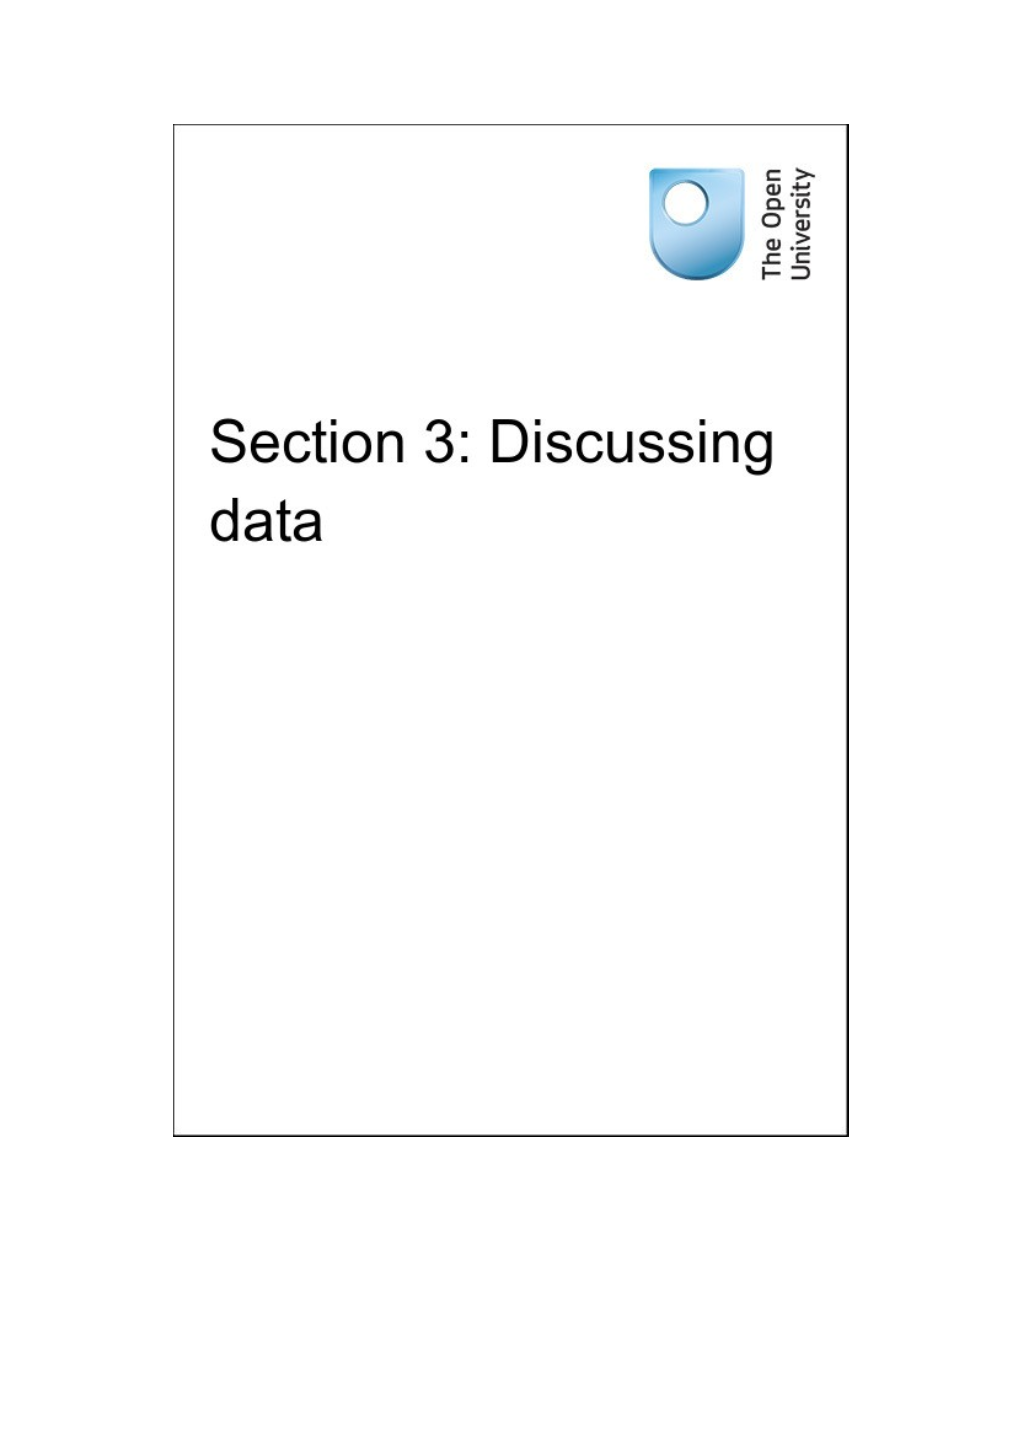 Section 3: Discussing Data